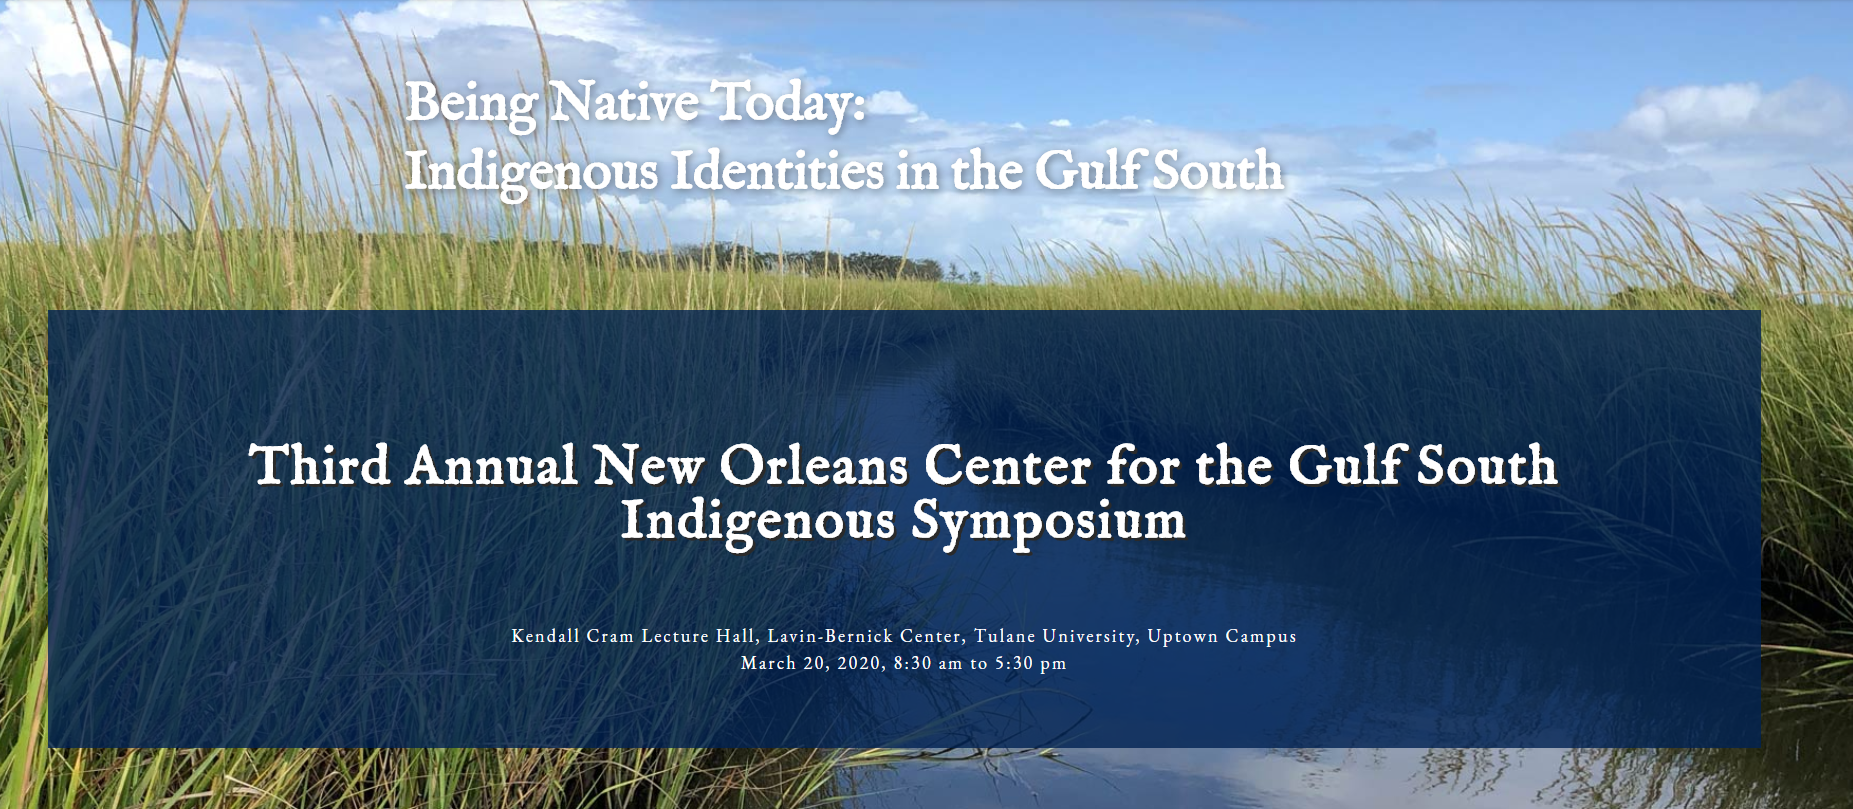 Third Annual New Orleans Center for the Gulf South Indigenous Symposium